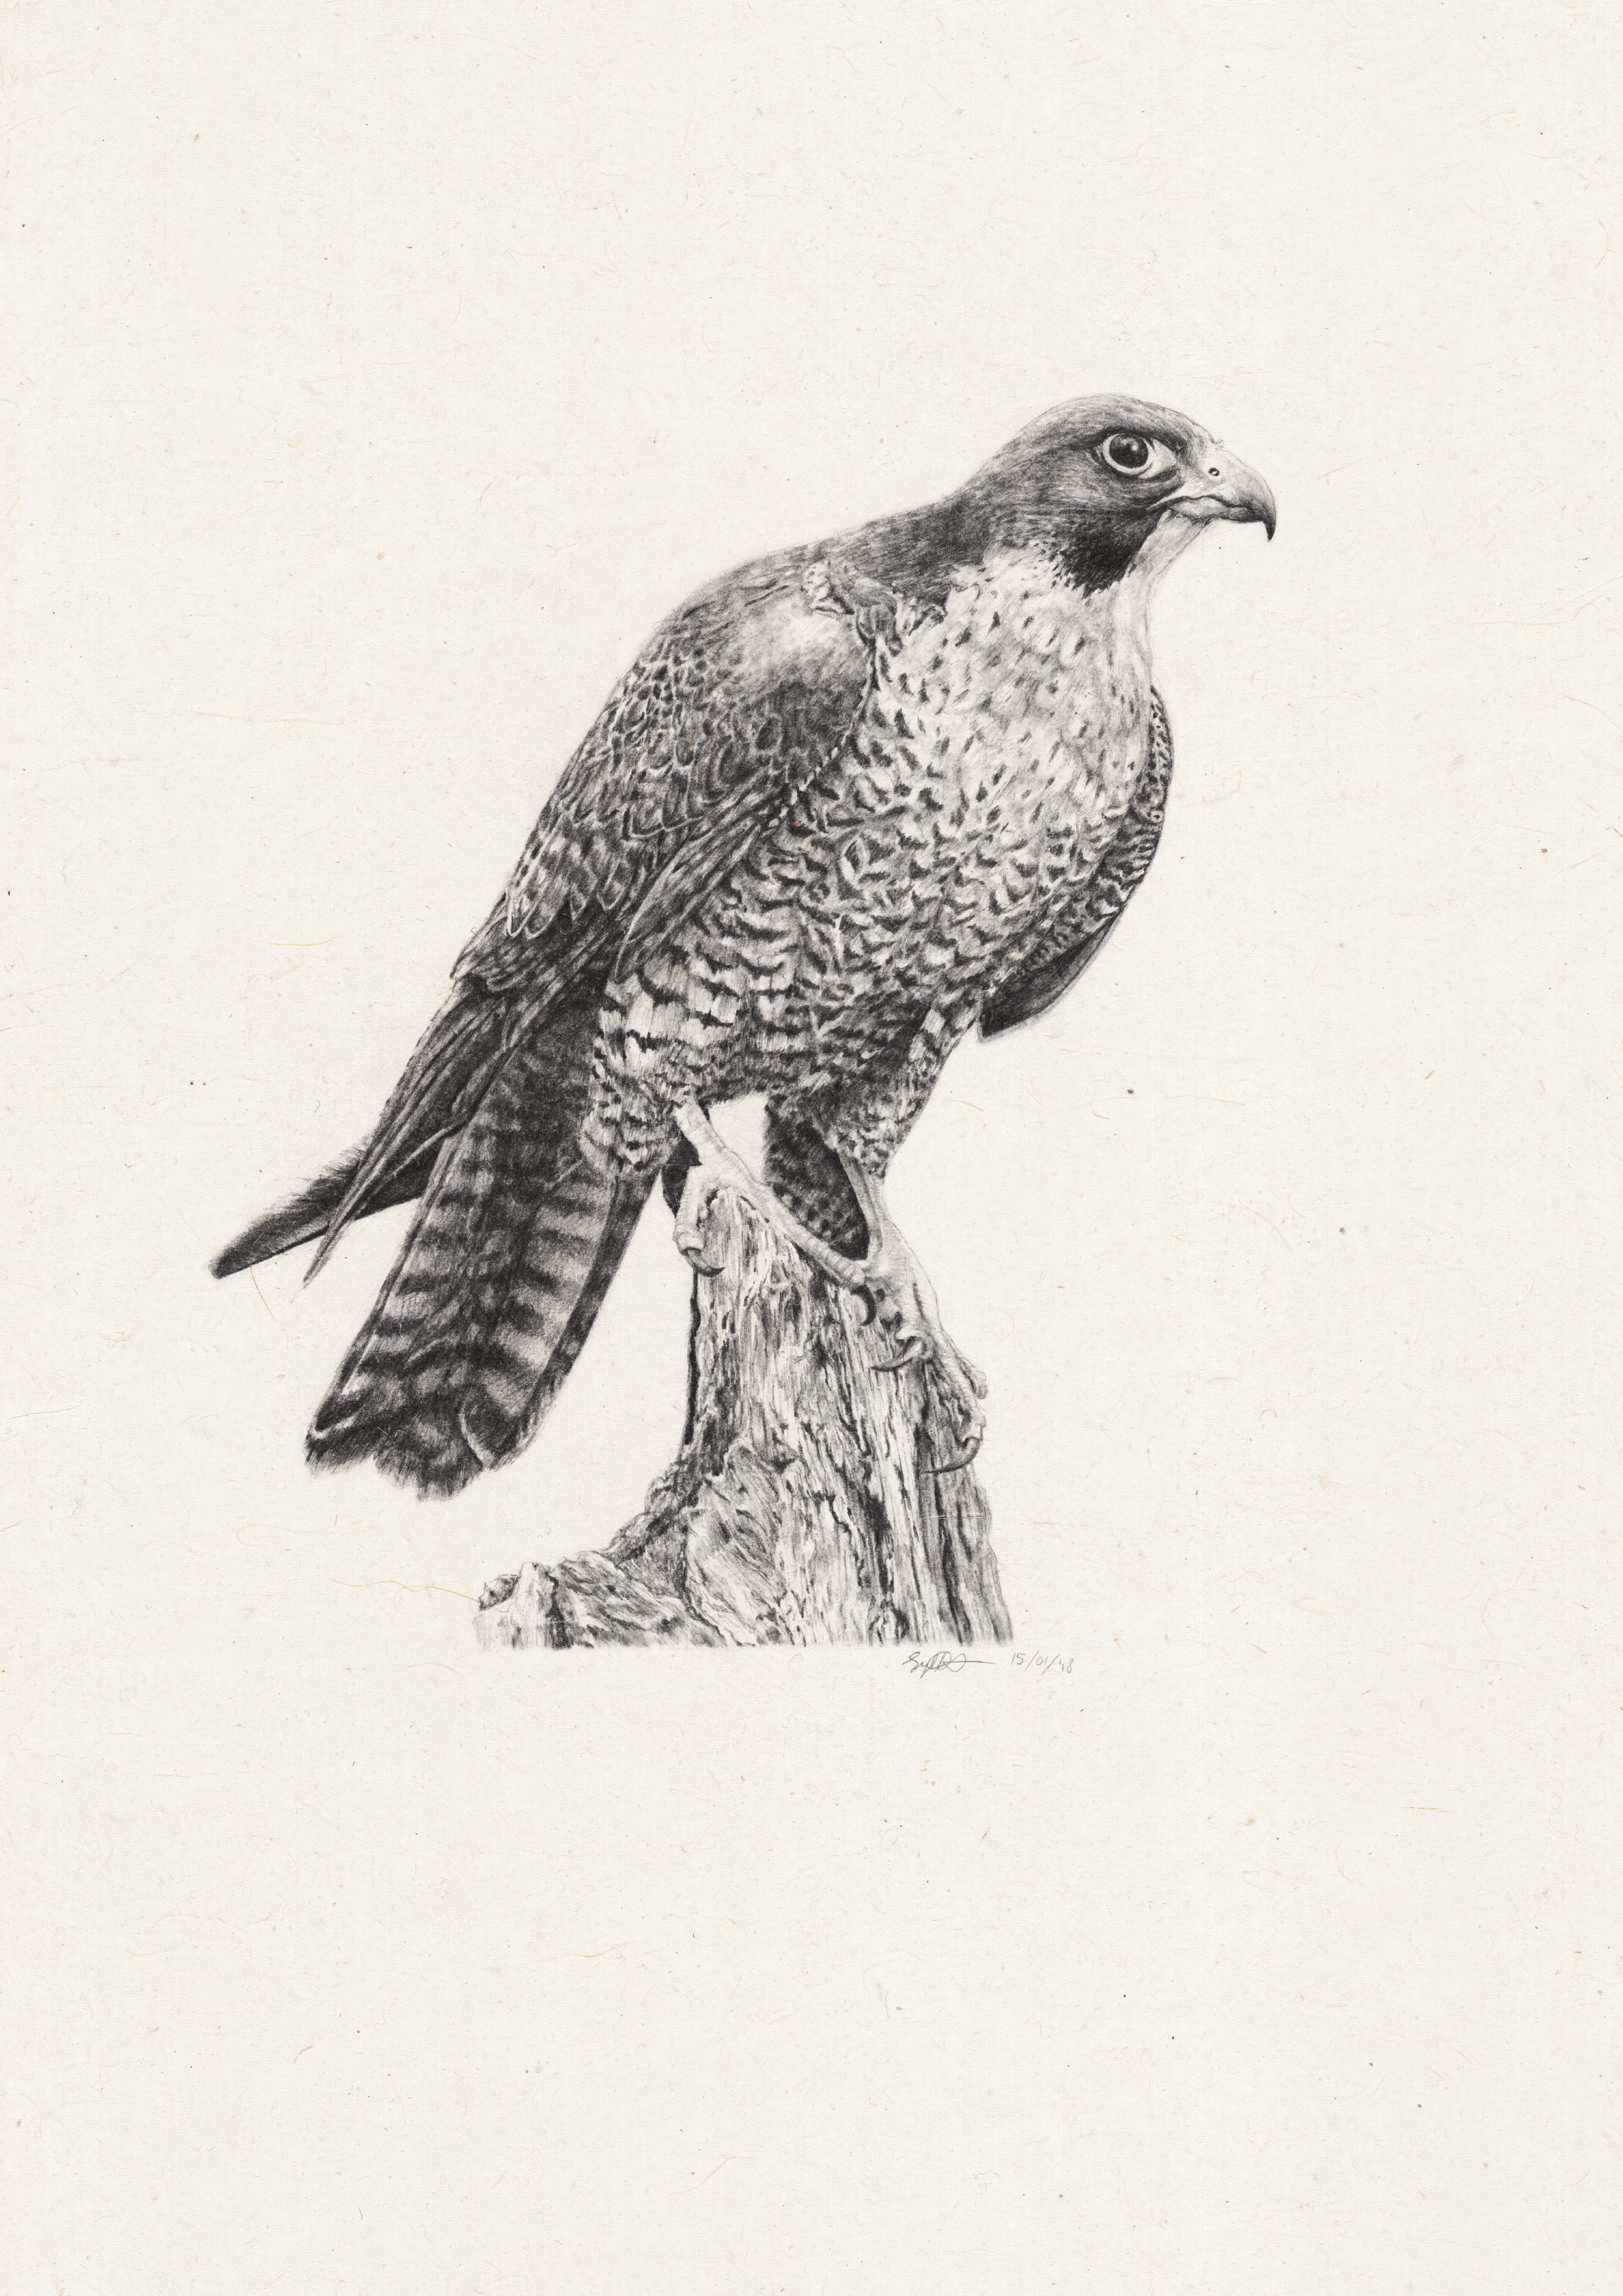 Exquisite Hand-Drawn Illustration of a Peregrine Falcon | Detailed Artwork of this Graceful Bird"